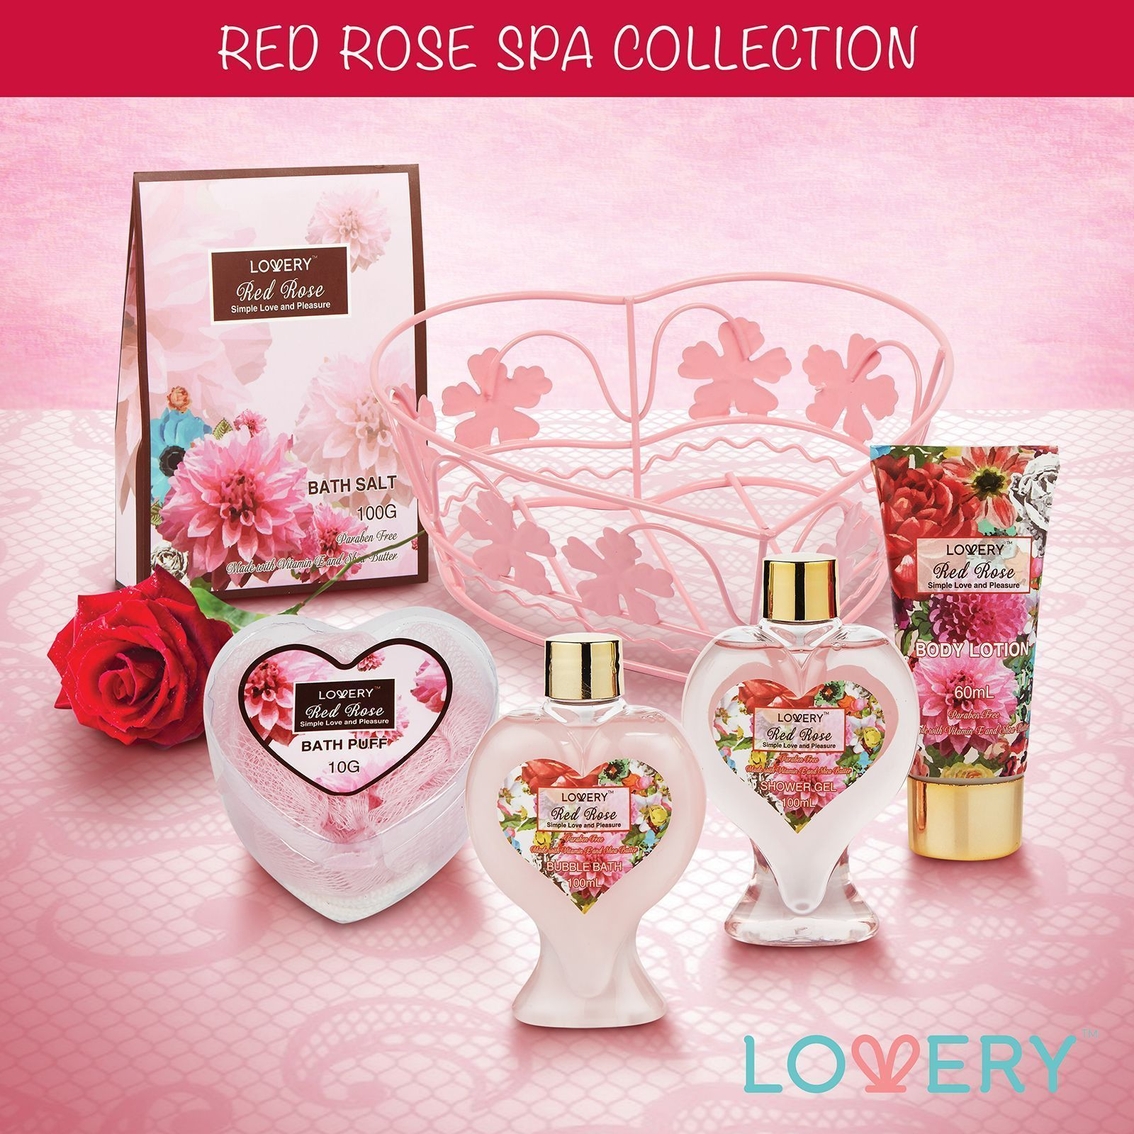 Lovery Home Spa Gift Basket - Red Rose Scent in Heart shaped wire basket - Image 5 of 5